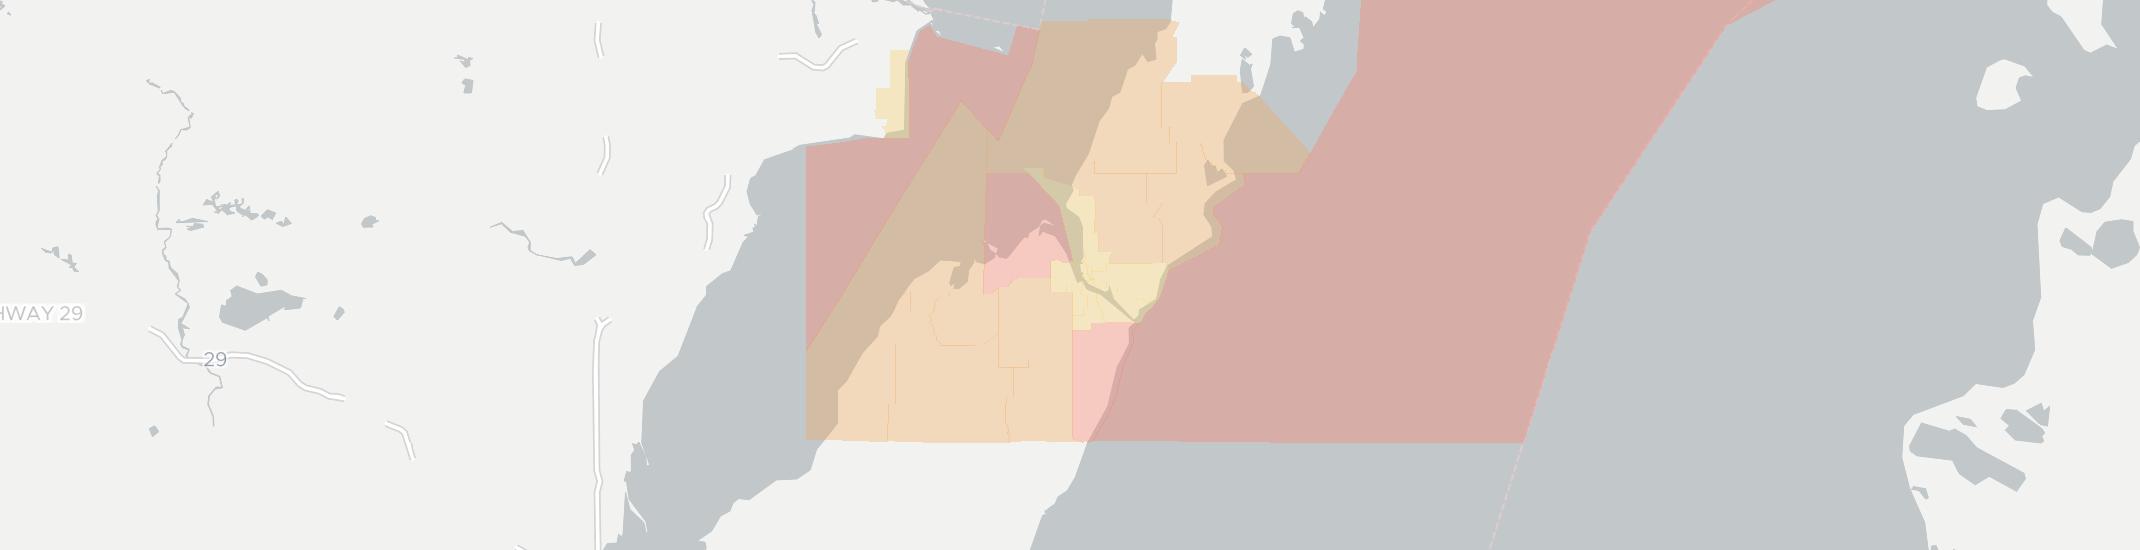 Sturgeon Bay Internet Competition Map. Click for interactive map.